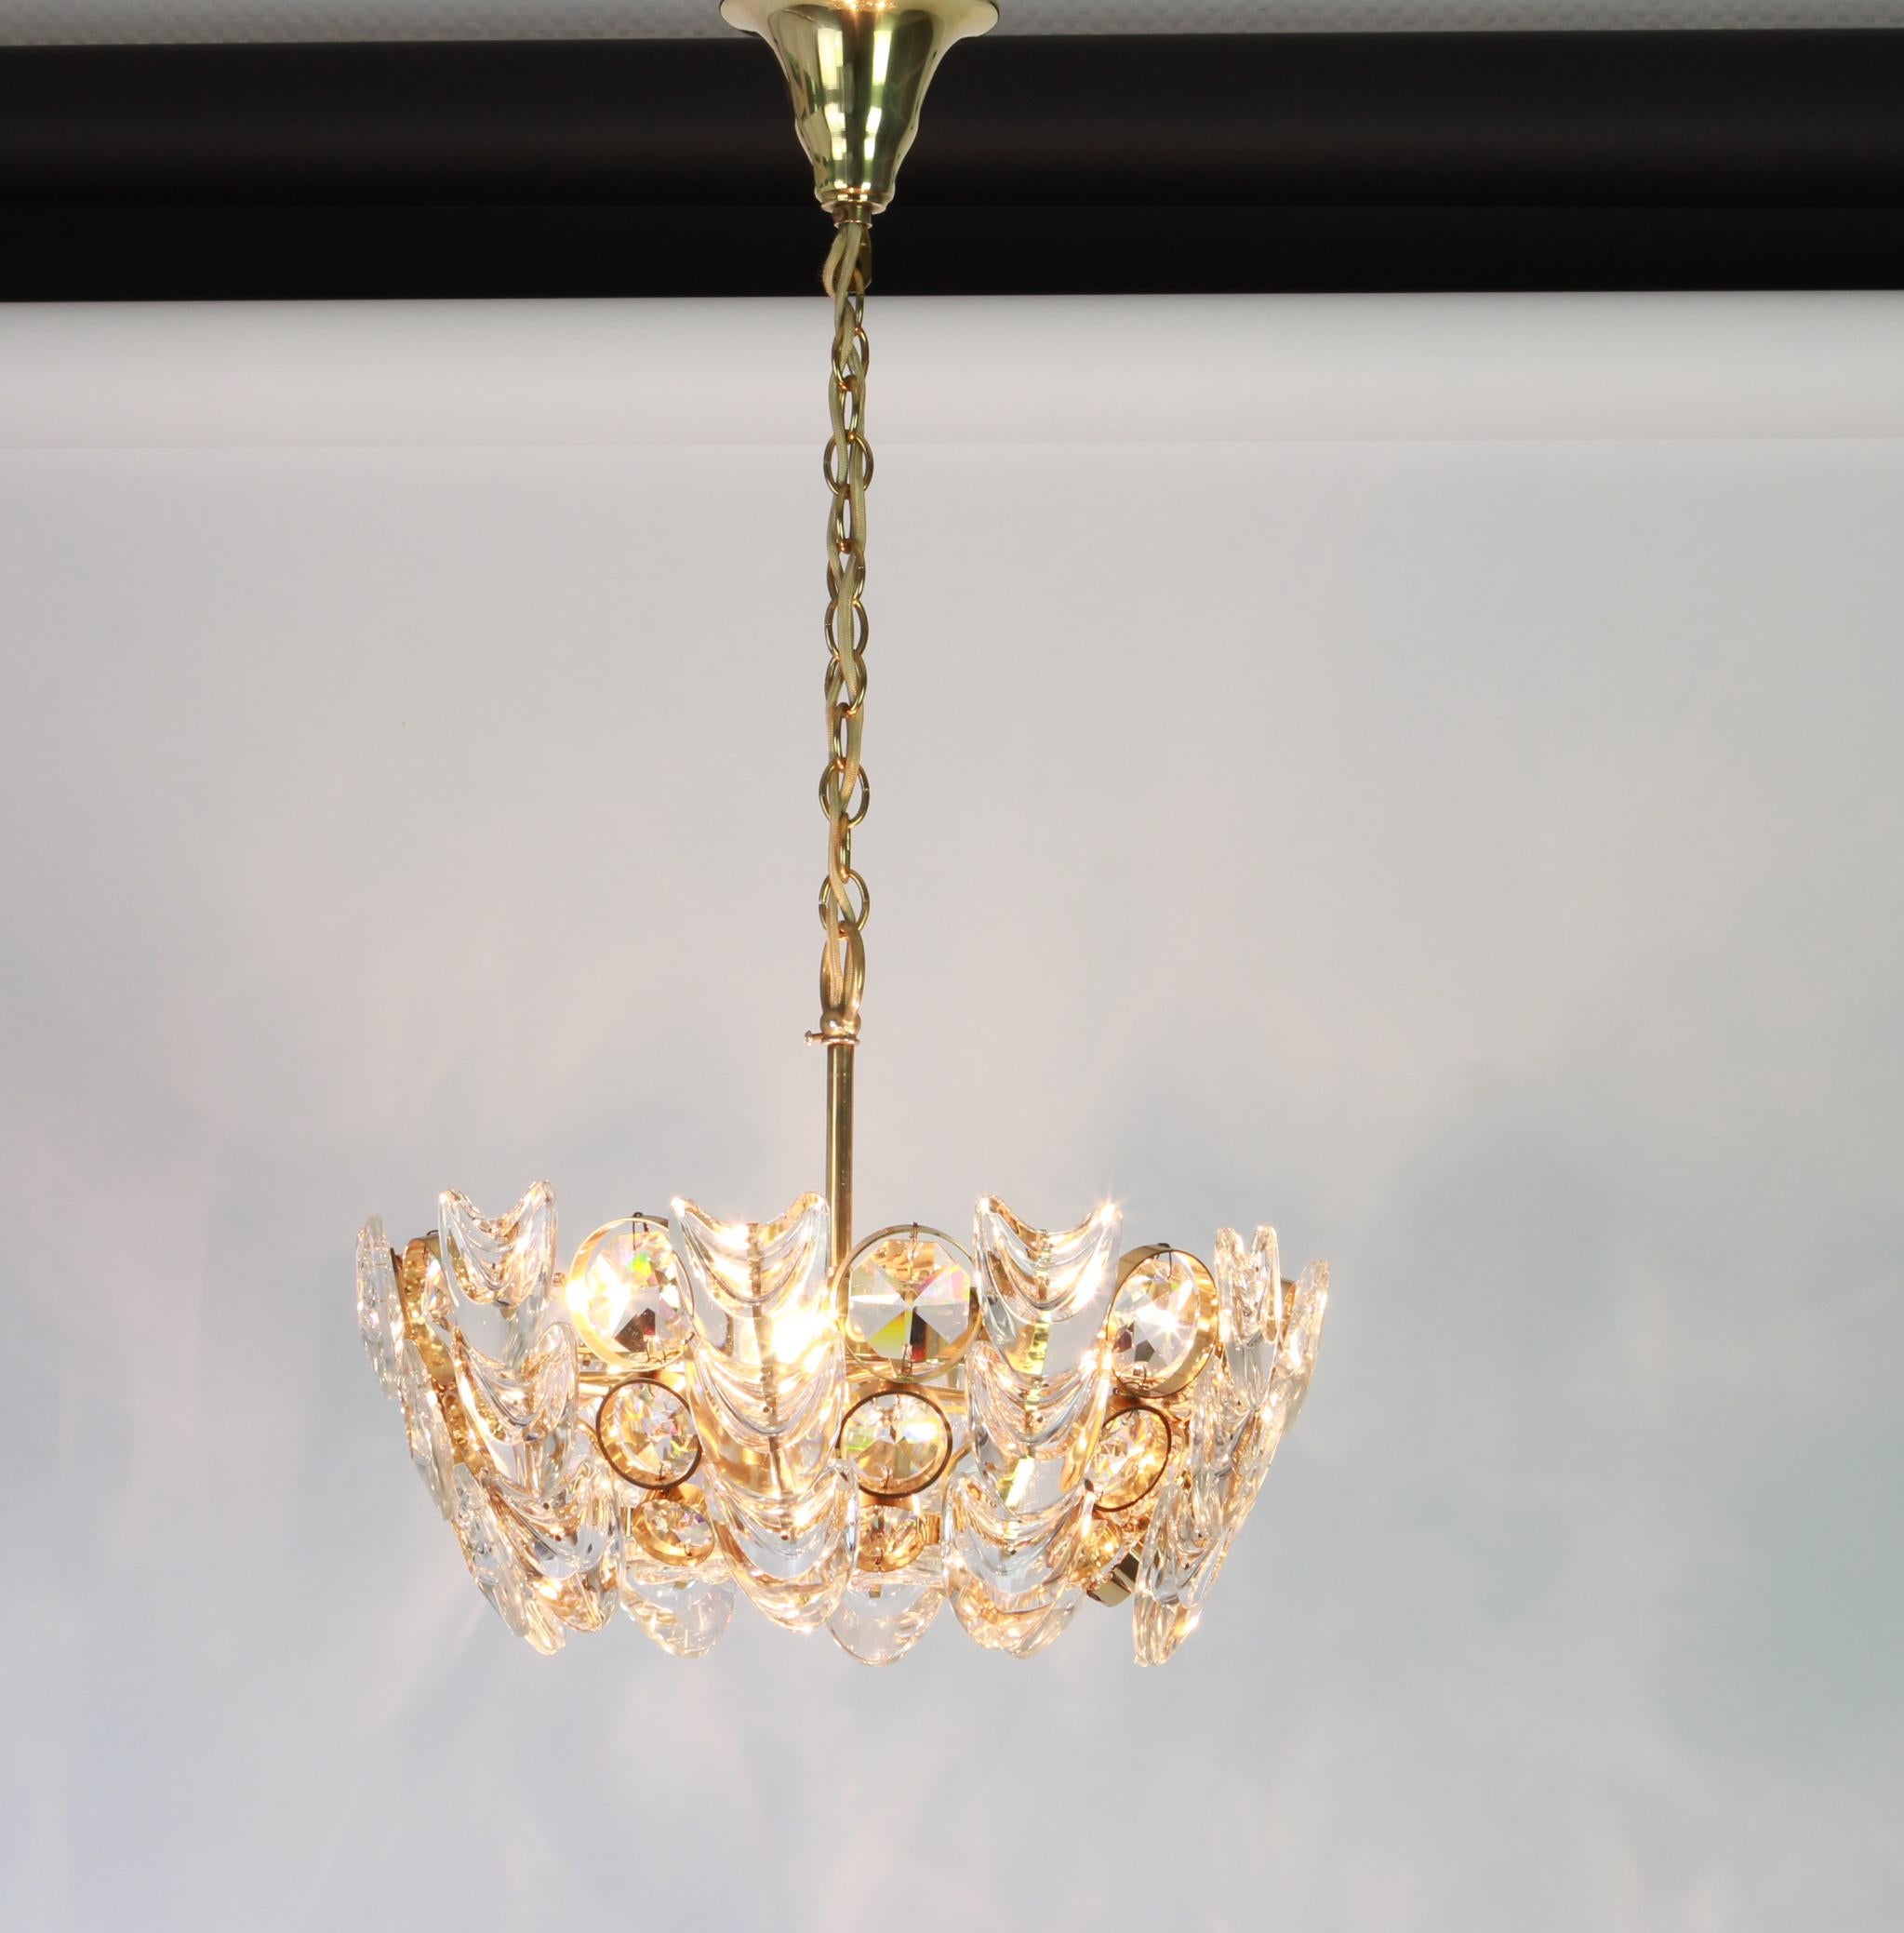 Late 20th Century Petite Gilt Brass and Crystal Glass Encrusted Chandelier by Palwa, Germany 1970s For Sale